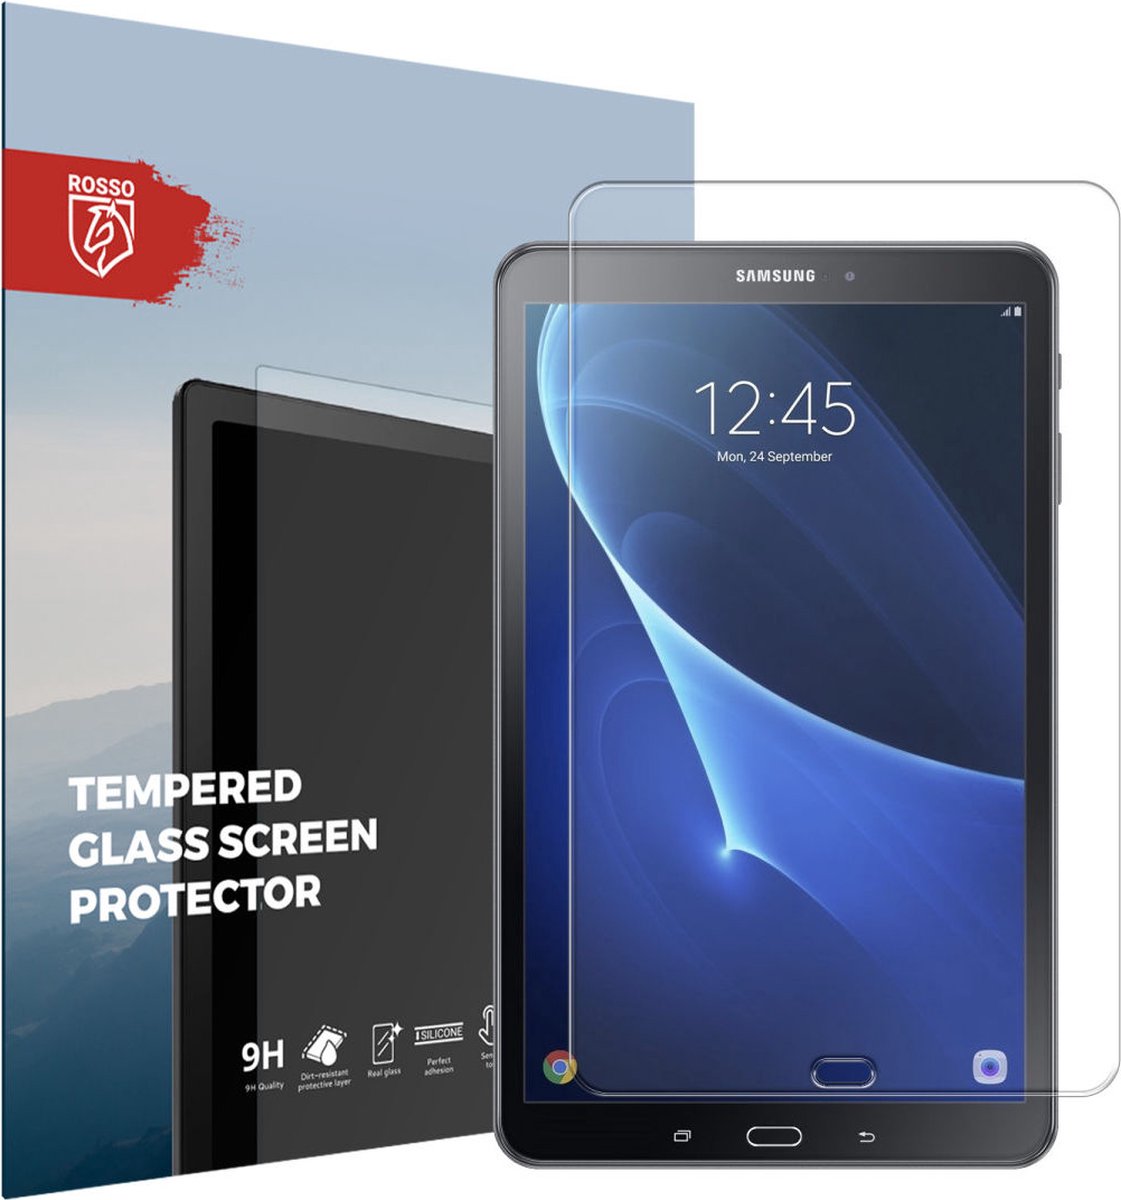 Rosso Samsung Galaxy Tab A 10.1 (2016) 9H Tempered Glass Screen Protector